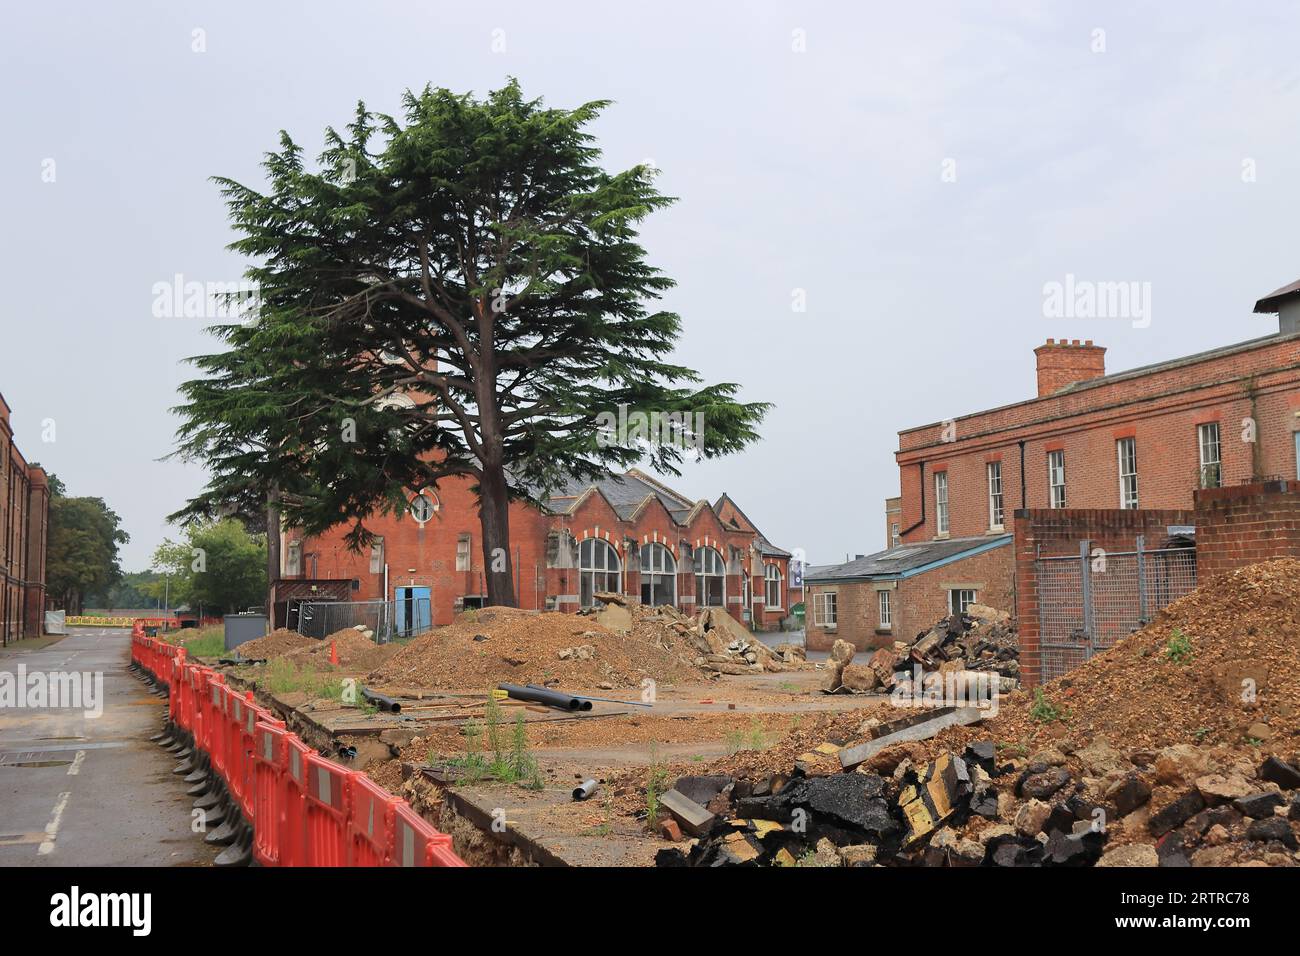 The site of the former Royal Navy Hospital, Haslar, is the subject of a £150 million redevelopment. Most of the buildings on the site are Grade 2 listed buildings and were built in the Victorian and Edwardian eras. This photograph shows the pathology laboratory, beyond the tree. Stock Photo